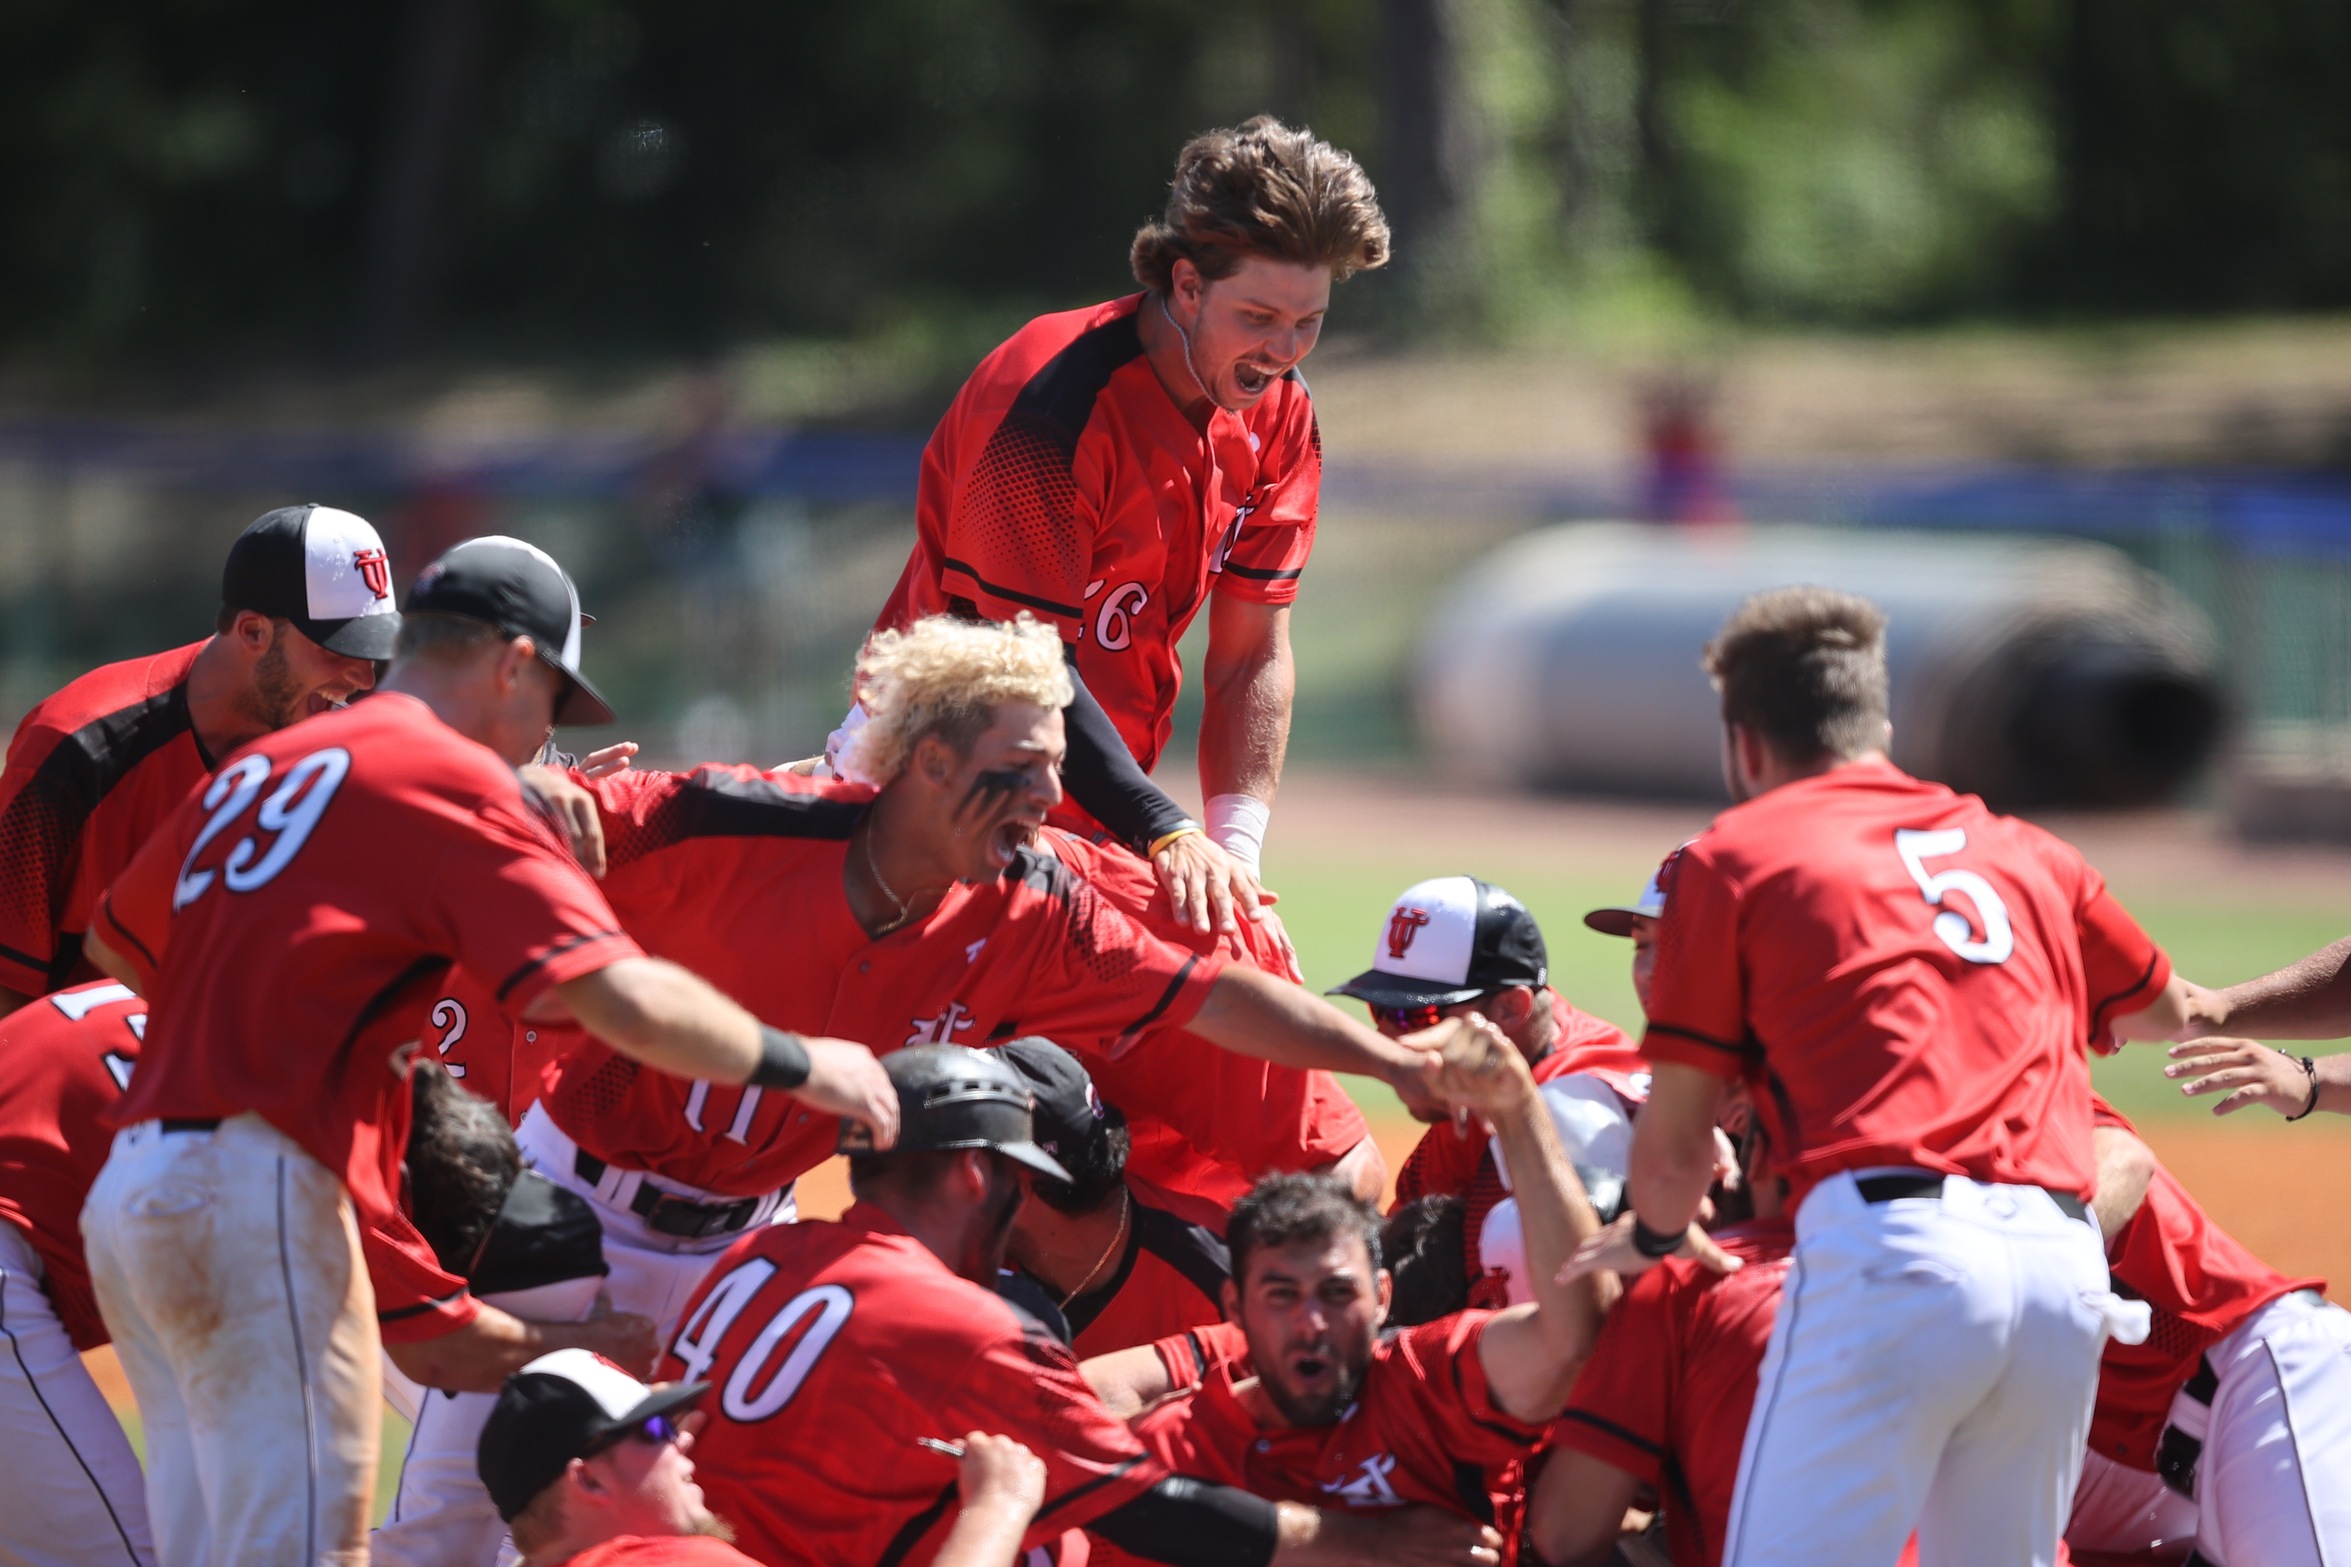 The University of Tampa Spartans baseball team celebrates their win over West Florida in the 2021 NCAA South Regional Final.